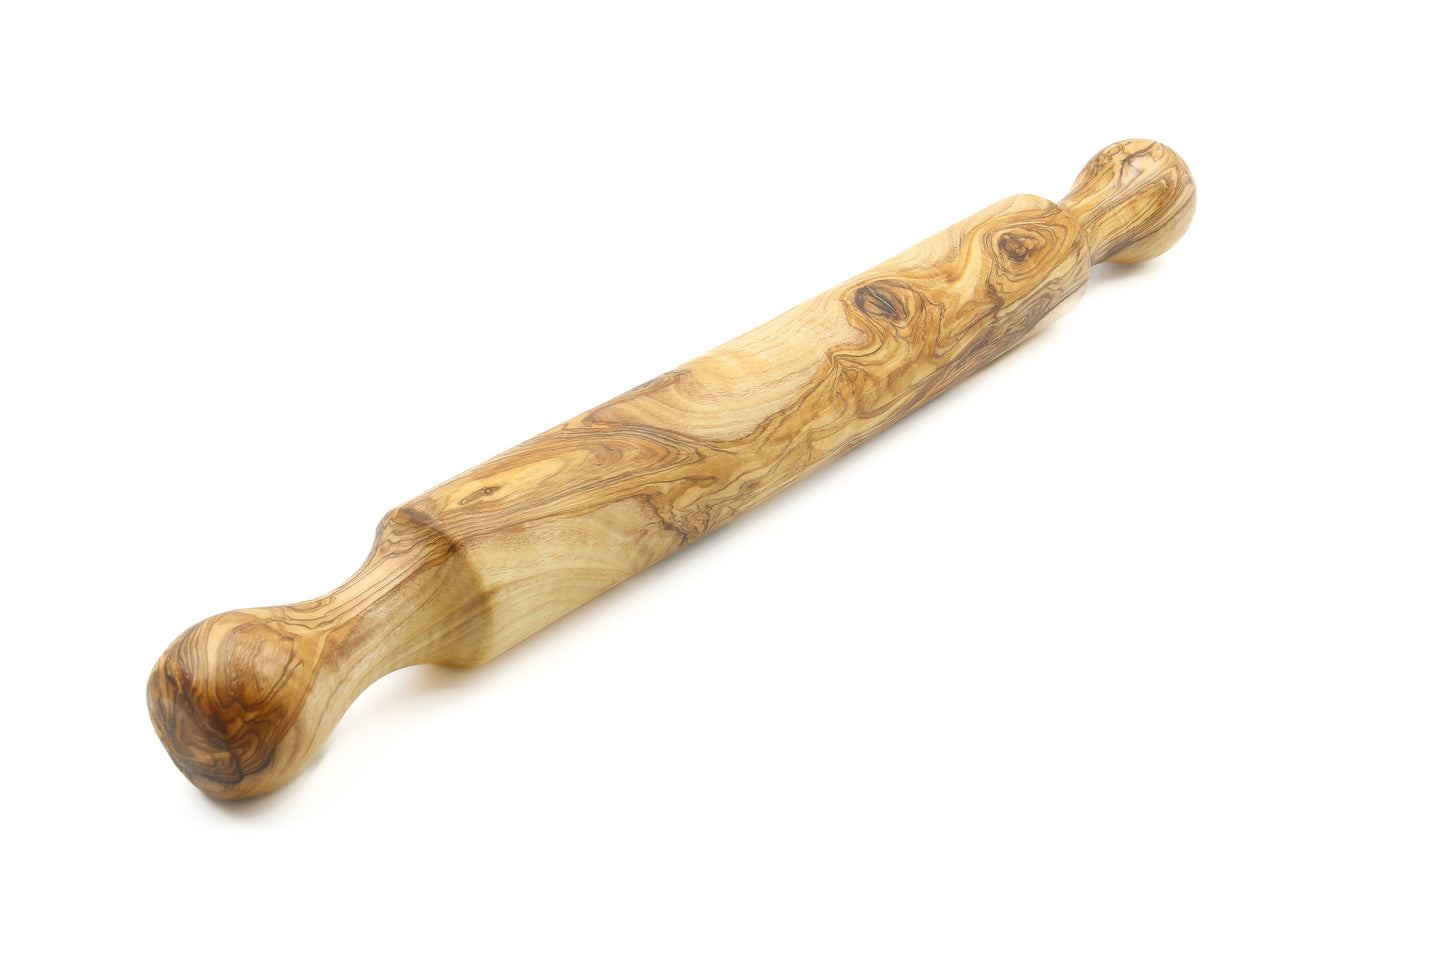 Artisan-made rolling pin in beautiful olive wood